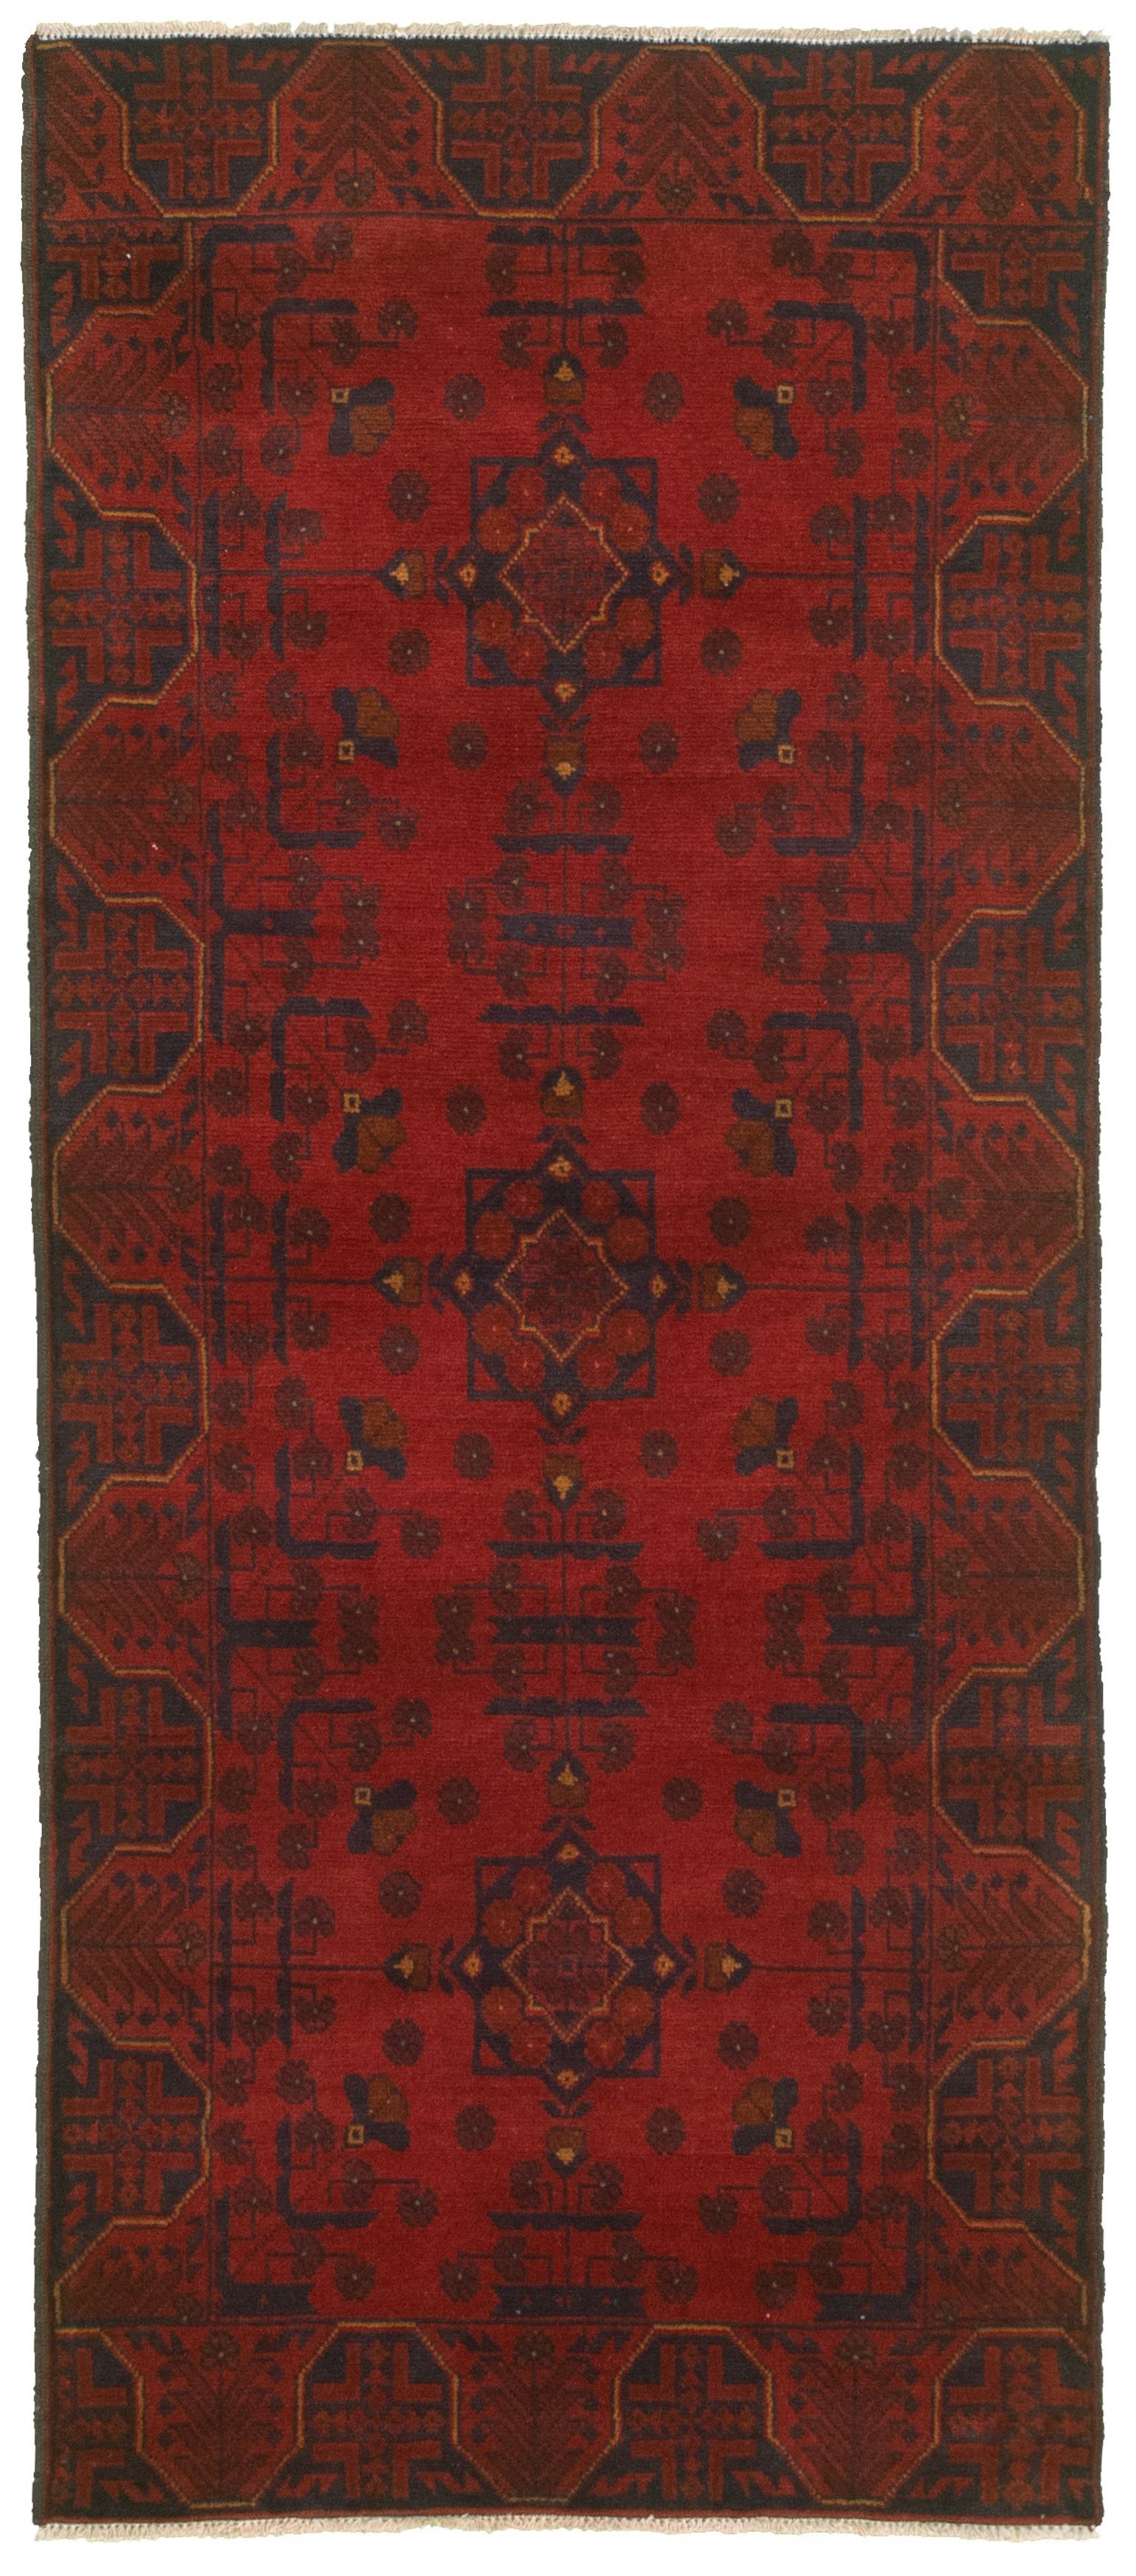 Hand-knotted Finest Khal Mohammadi Red  Rug 2'8" x 6'4"  Size: 2'8" x 6'4"  